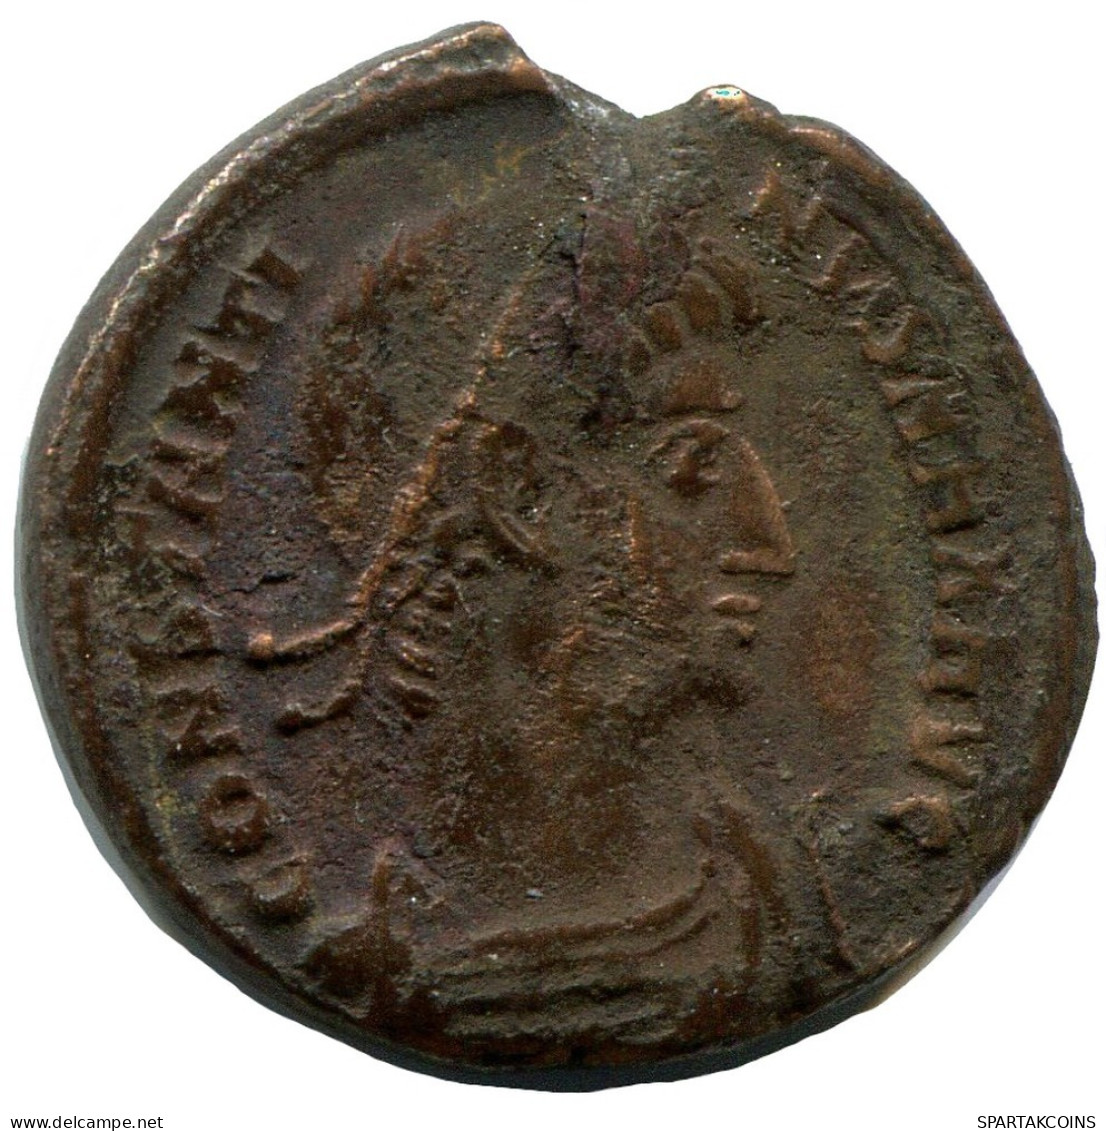 CONSTANTINE I MINTED IN NICOMEDIA FROM THE ROYAL ONTARIO MUSEUM #ANC10895.14.F.A - El Impero Christiano (307 / 363)